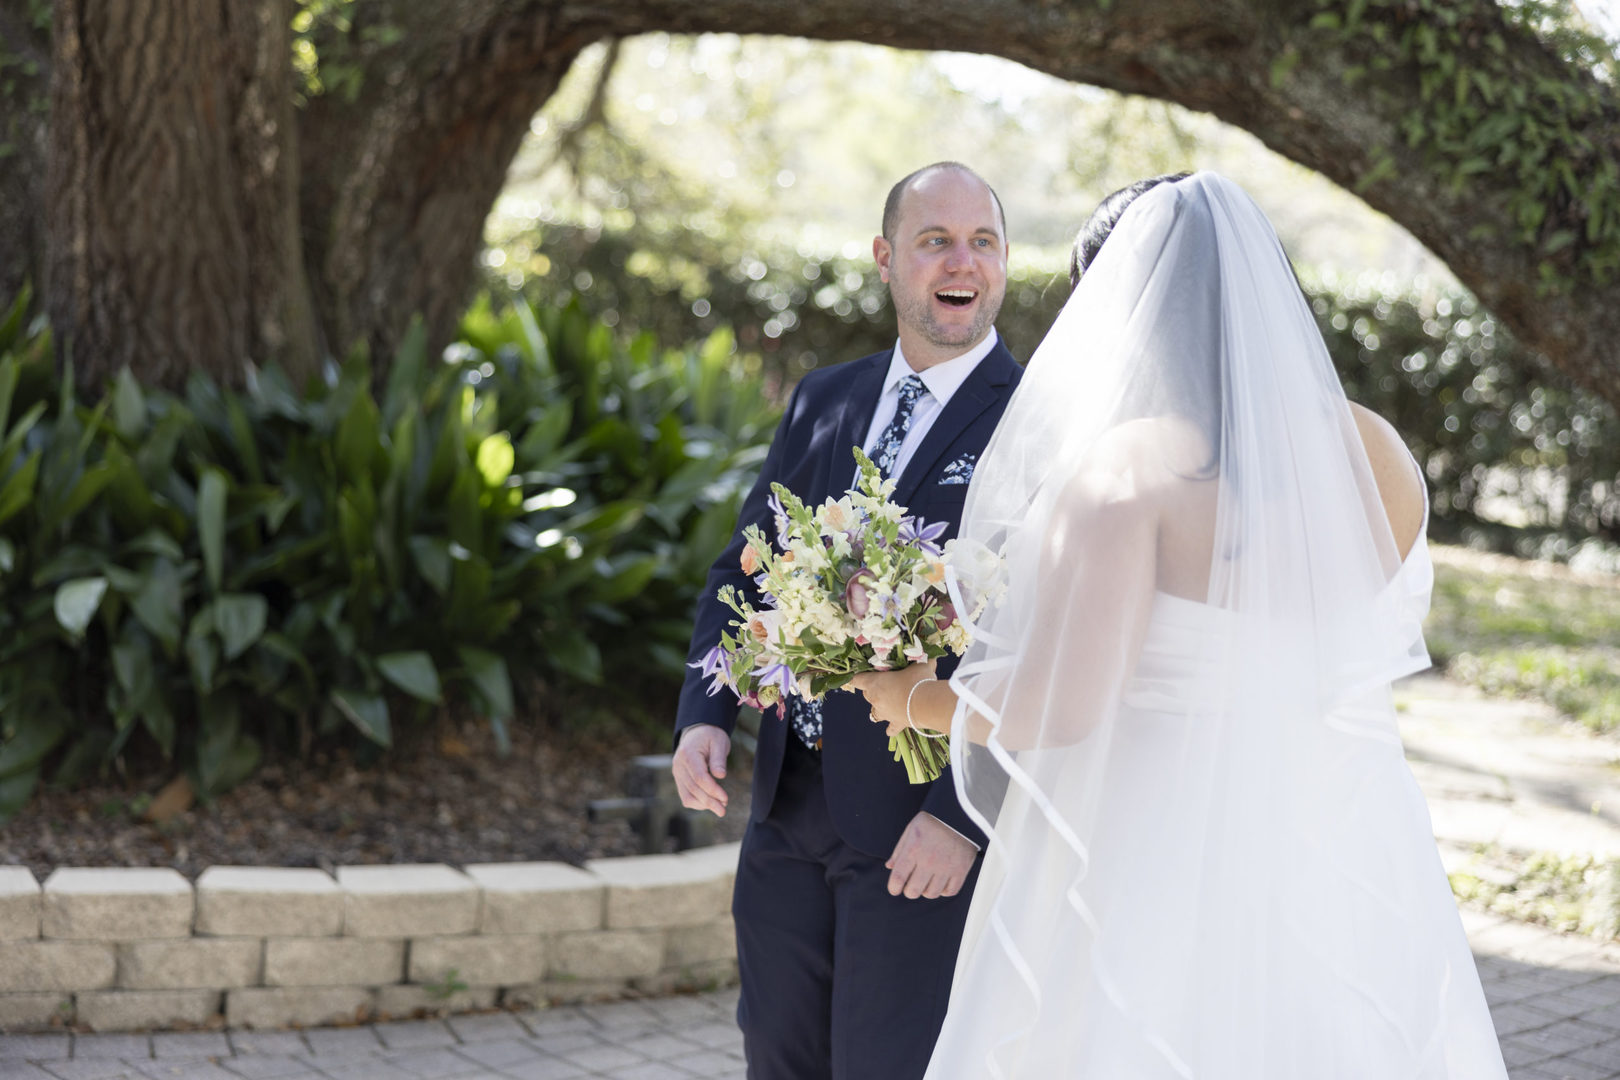 First look of the bride and groom at their Vintage Court Real Wedding in Covington LA